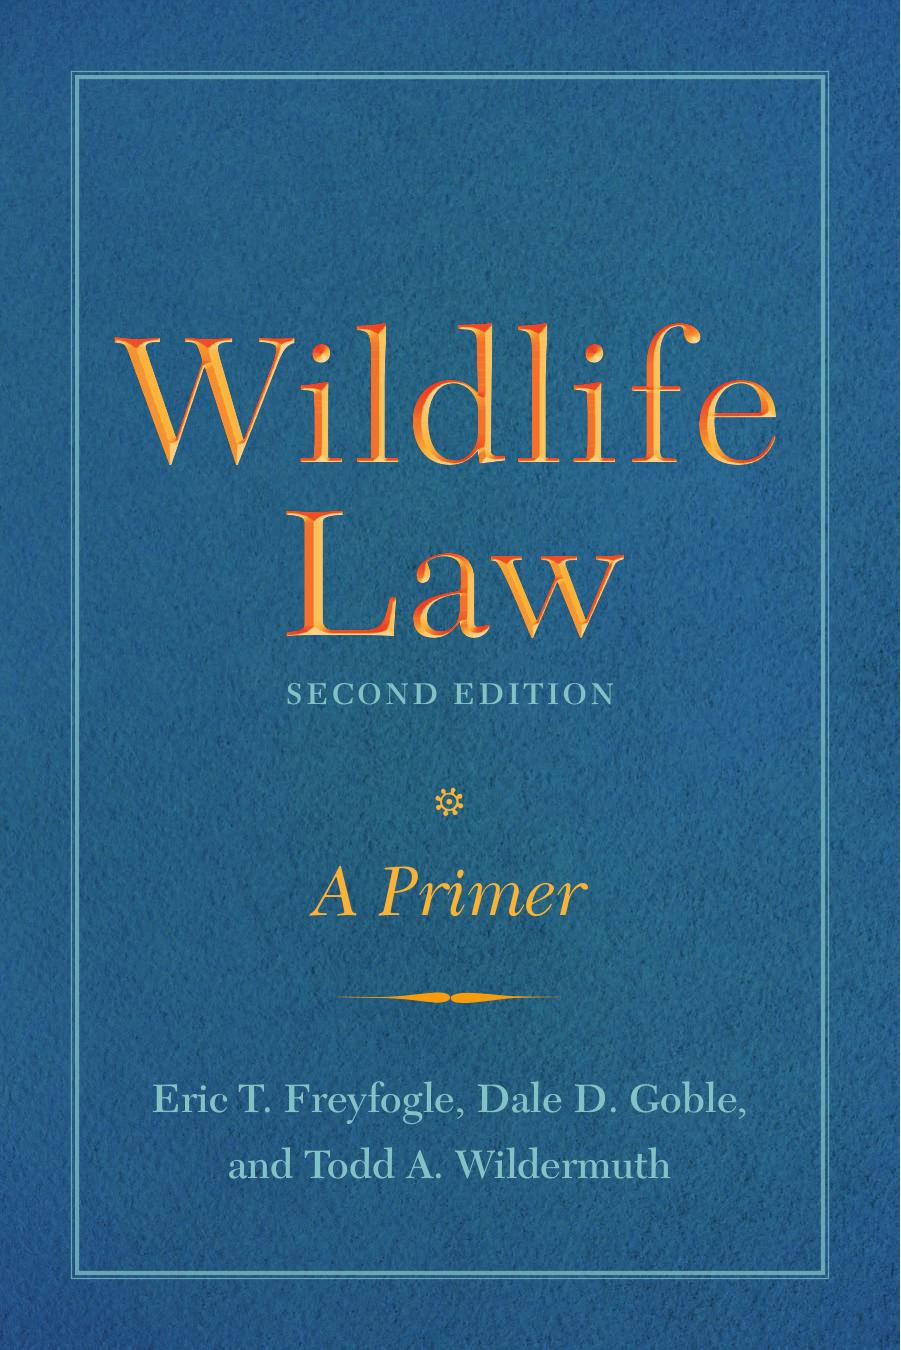 Wildlife Law, Second Edition : A Primer by Eric T. Freyfogle; Dale D. Goble; Todd A. Wildermuth